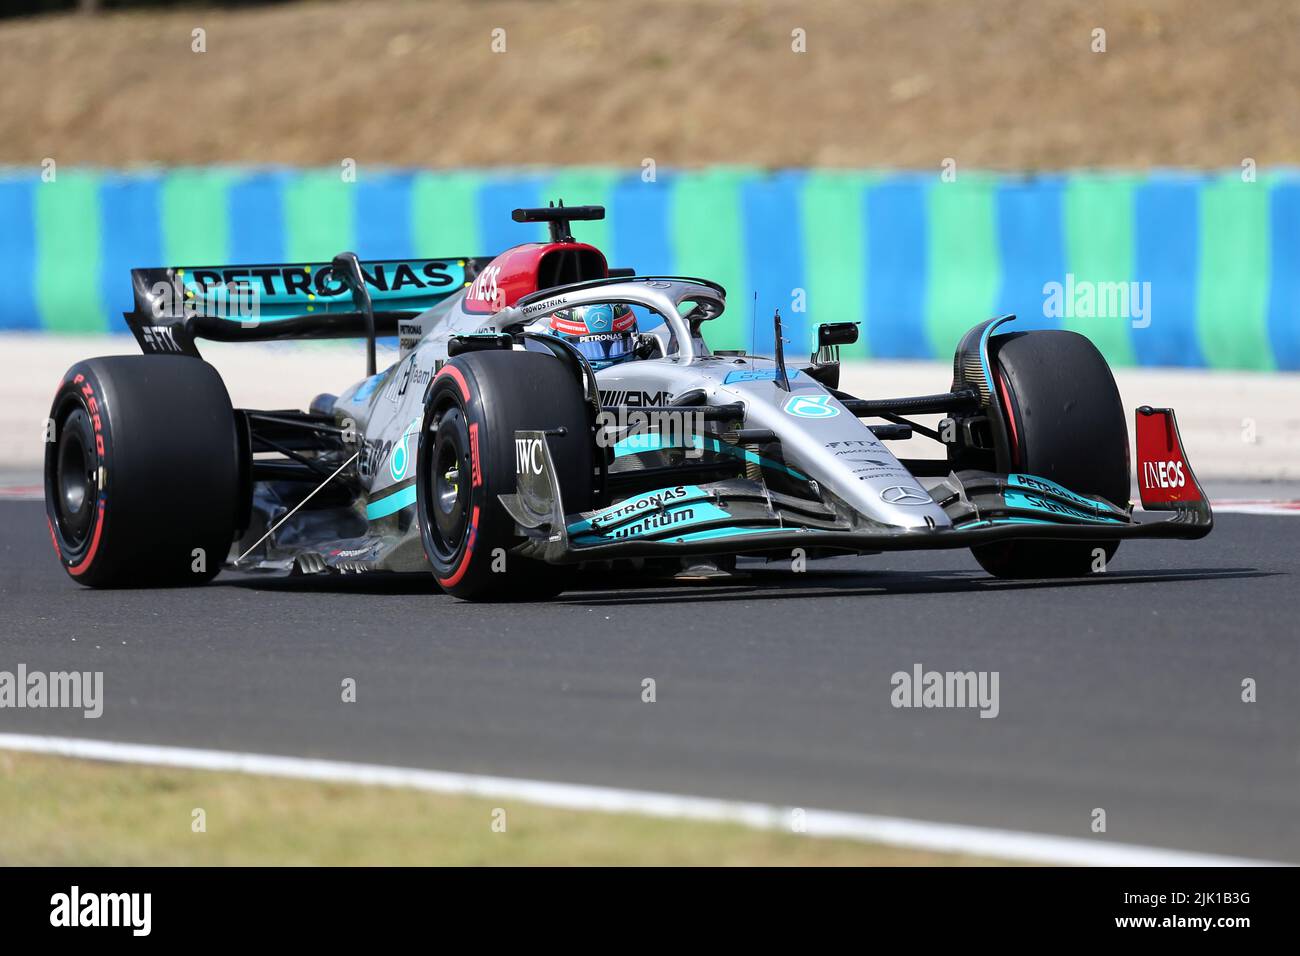 George Russell of Mercedes AMG Petronas F1 Team on track during free practice 1 ahead of the F1 Grand Prix of Hungary Stock Photo